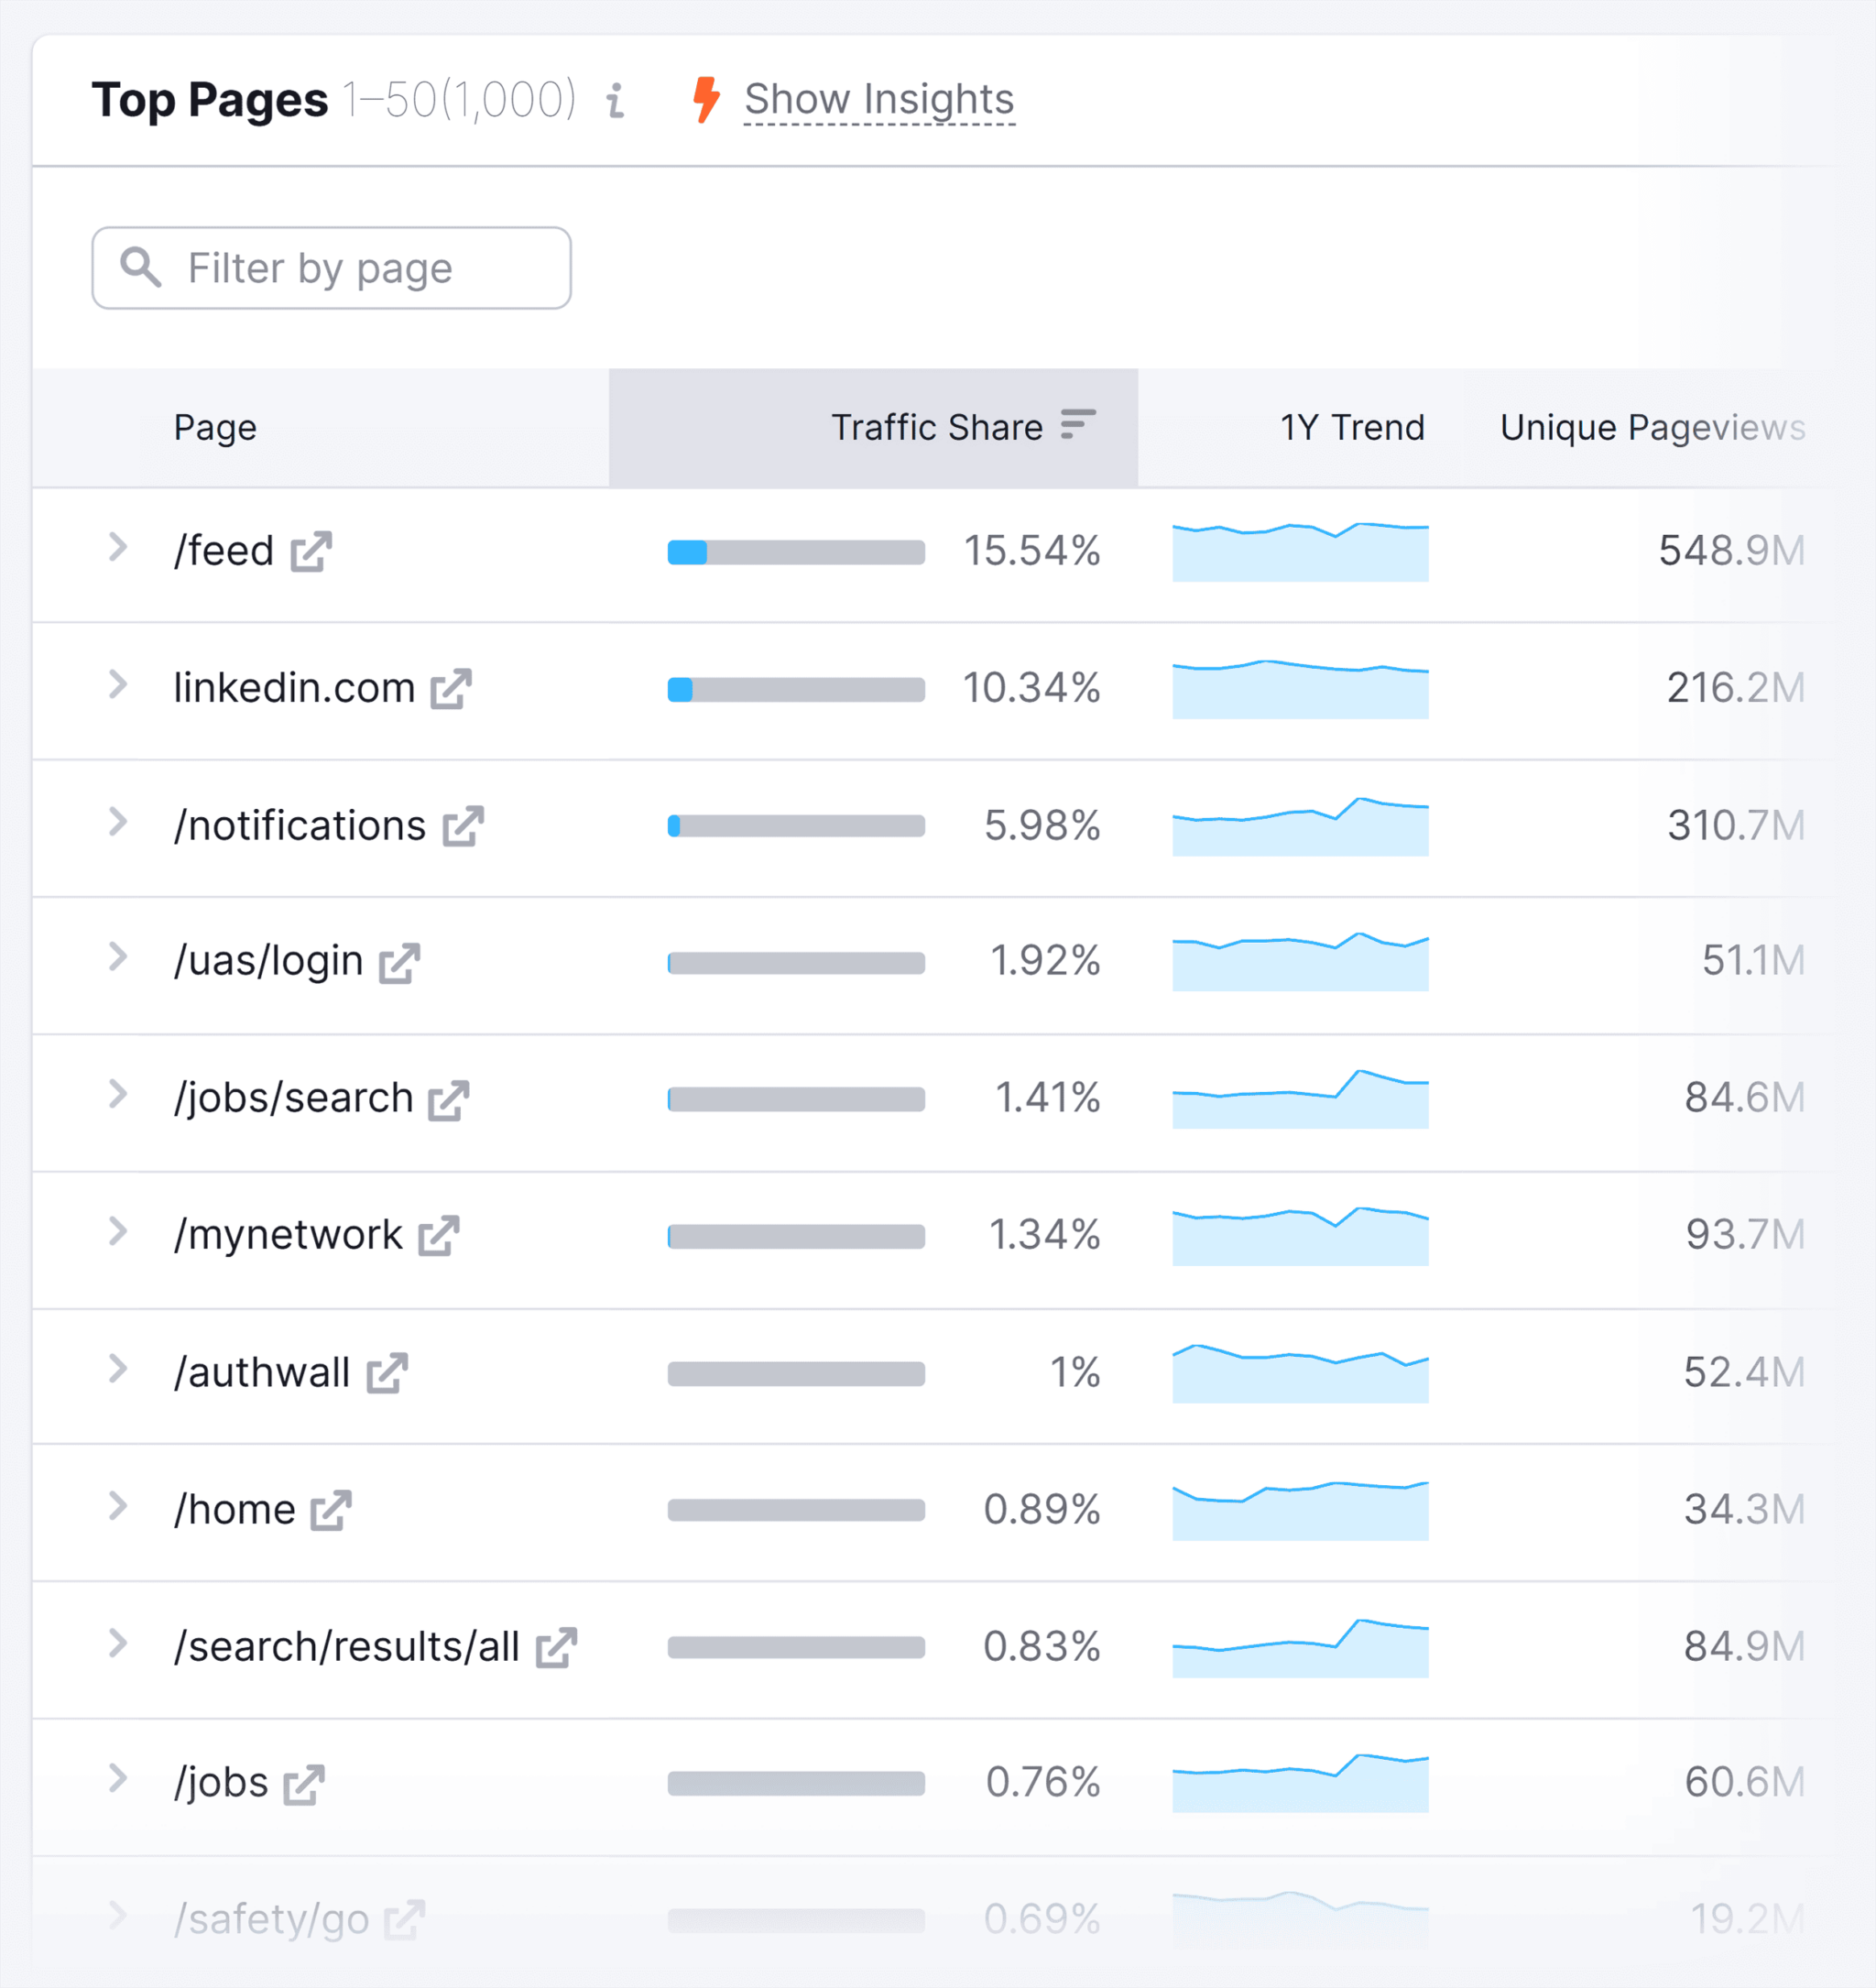 traffic-overview-top-pages 29 Top Digital Marketing Tools for Every Budget